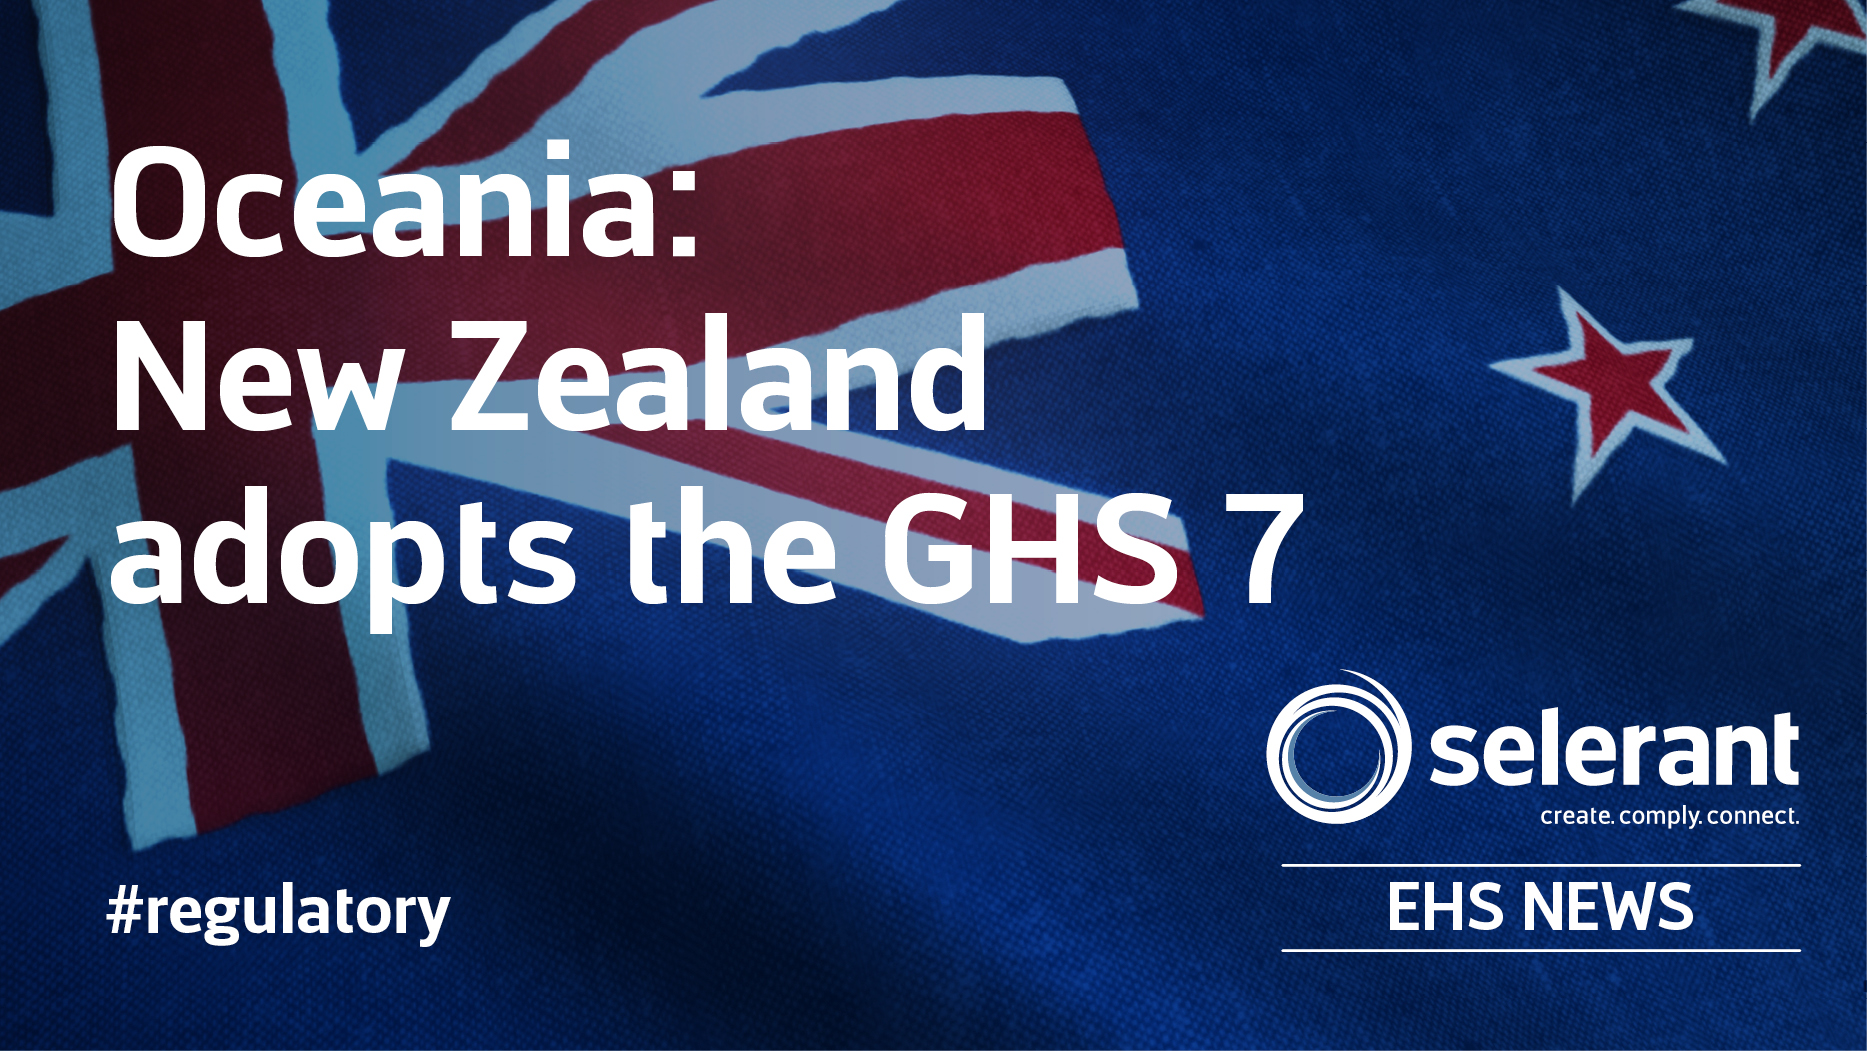 Oceania: New Zealand adopts the GHS 7